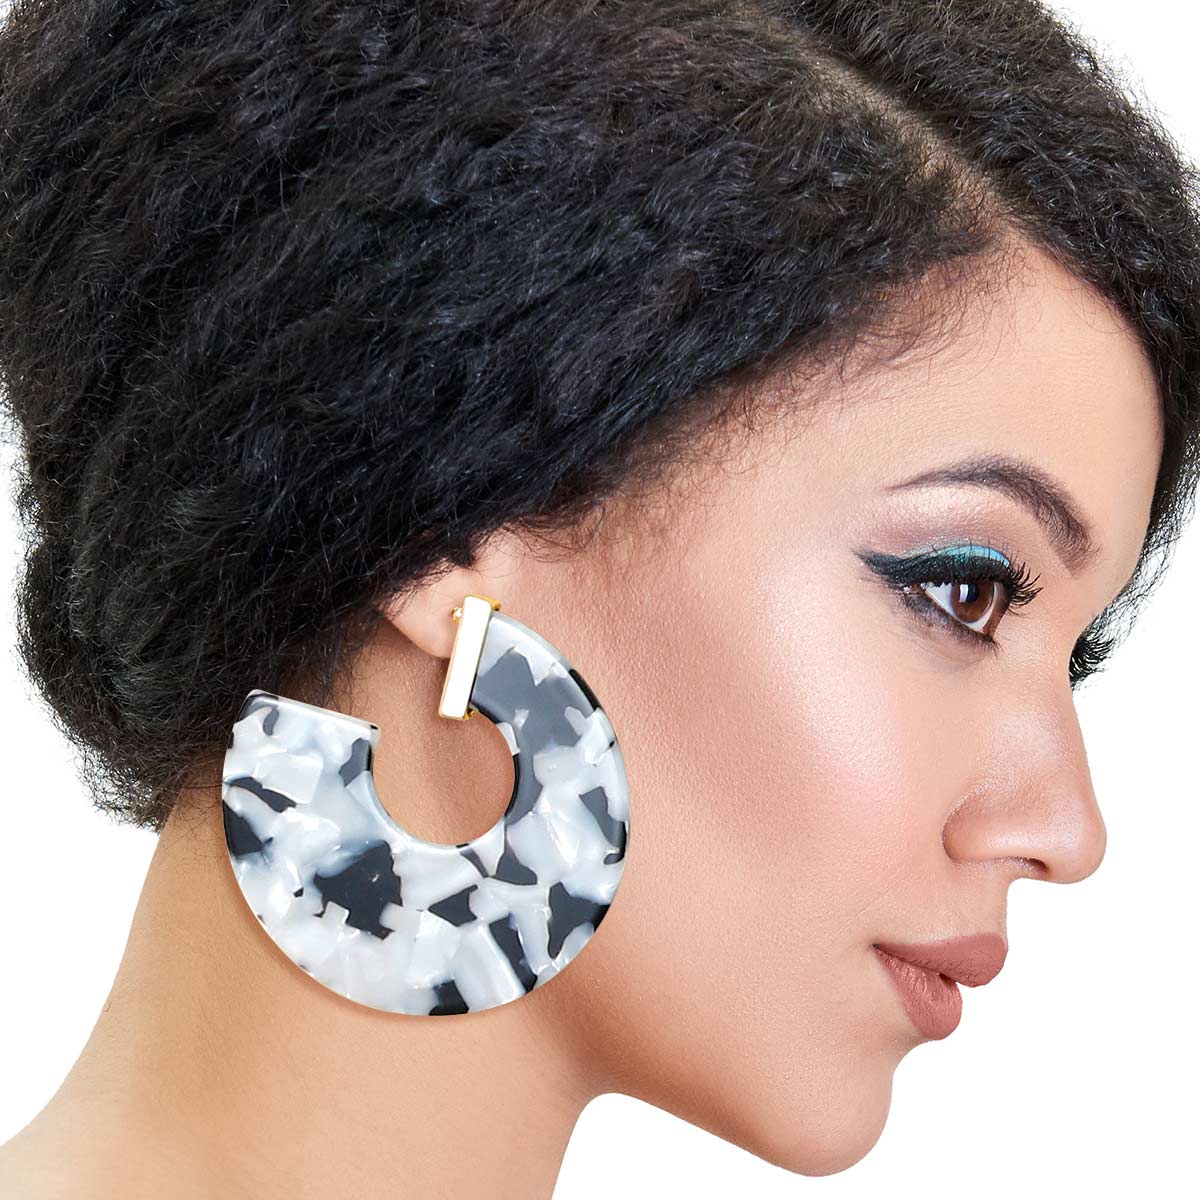 Black and White Marble Acrylic Hoops